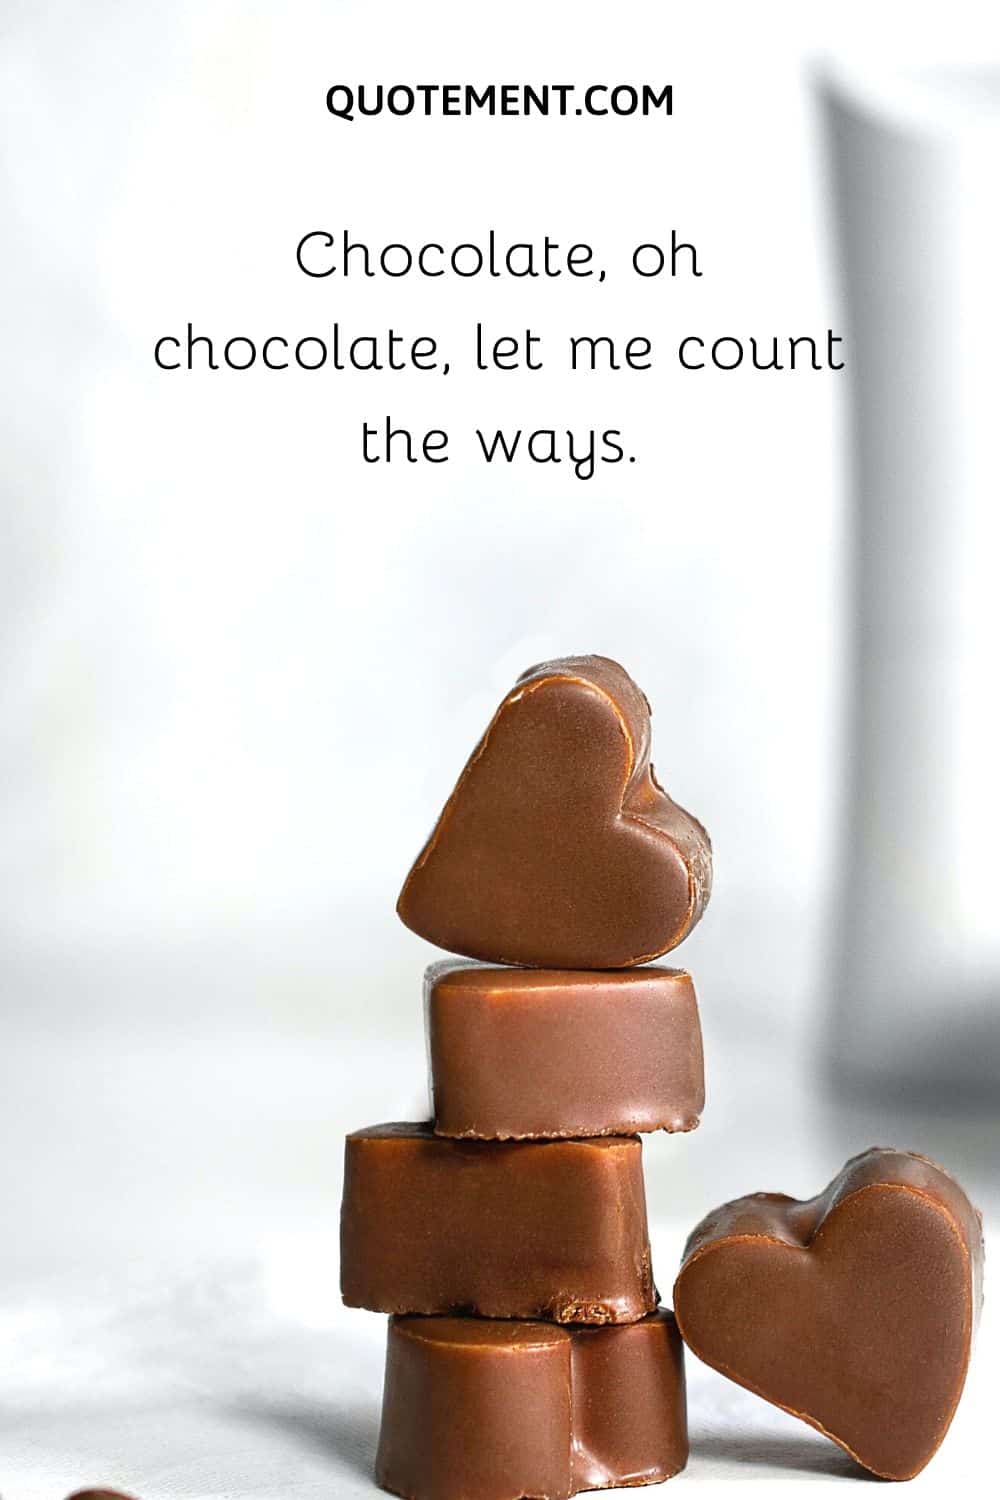 Chocolate, oh chocolate, let me count the ways.